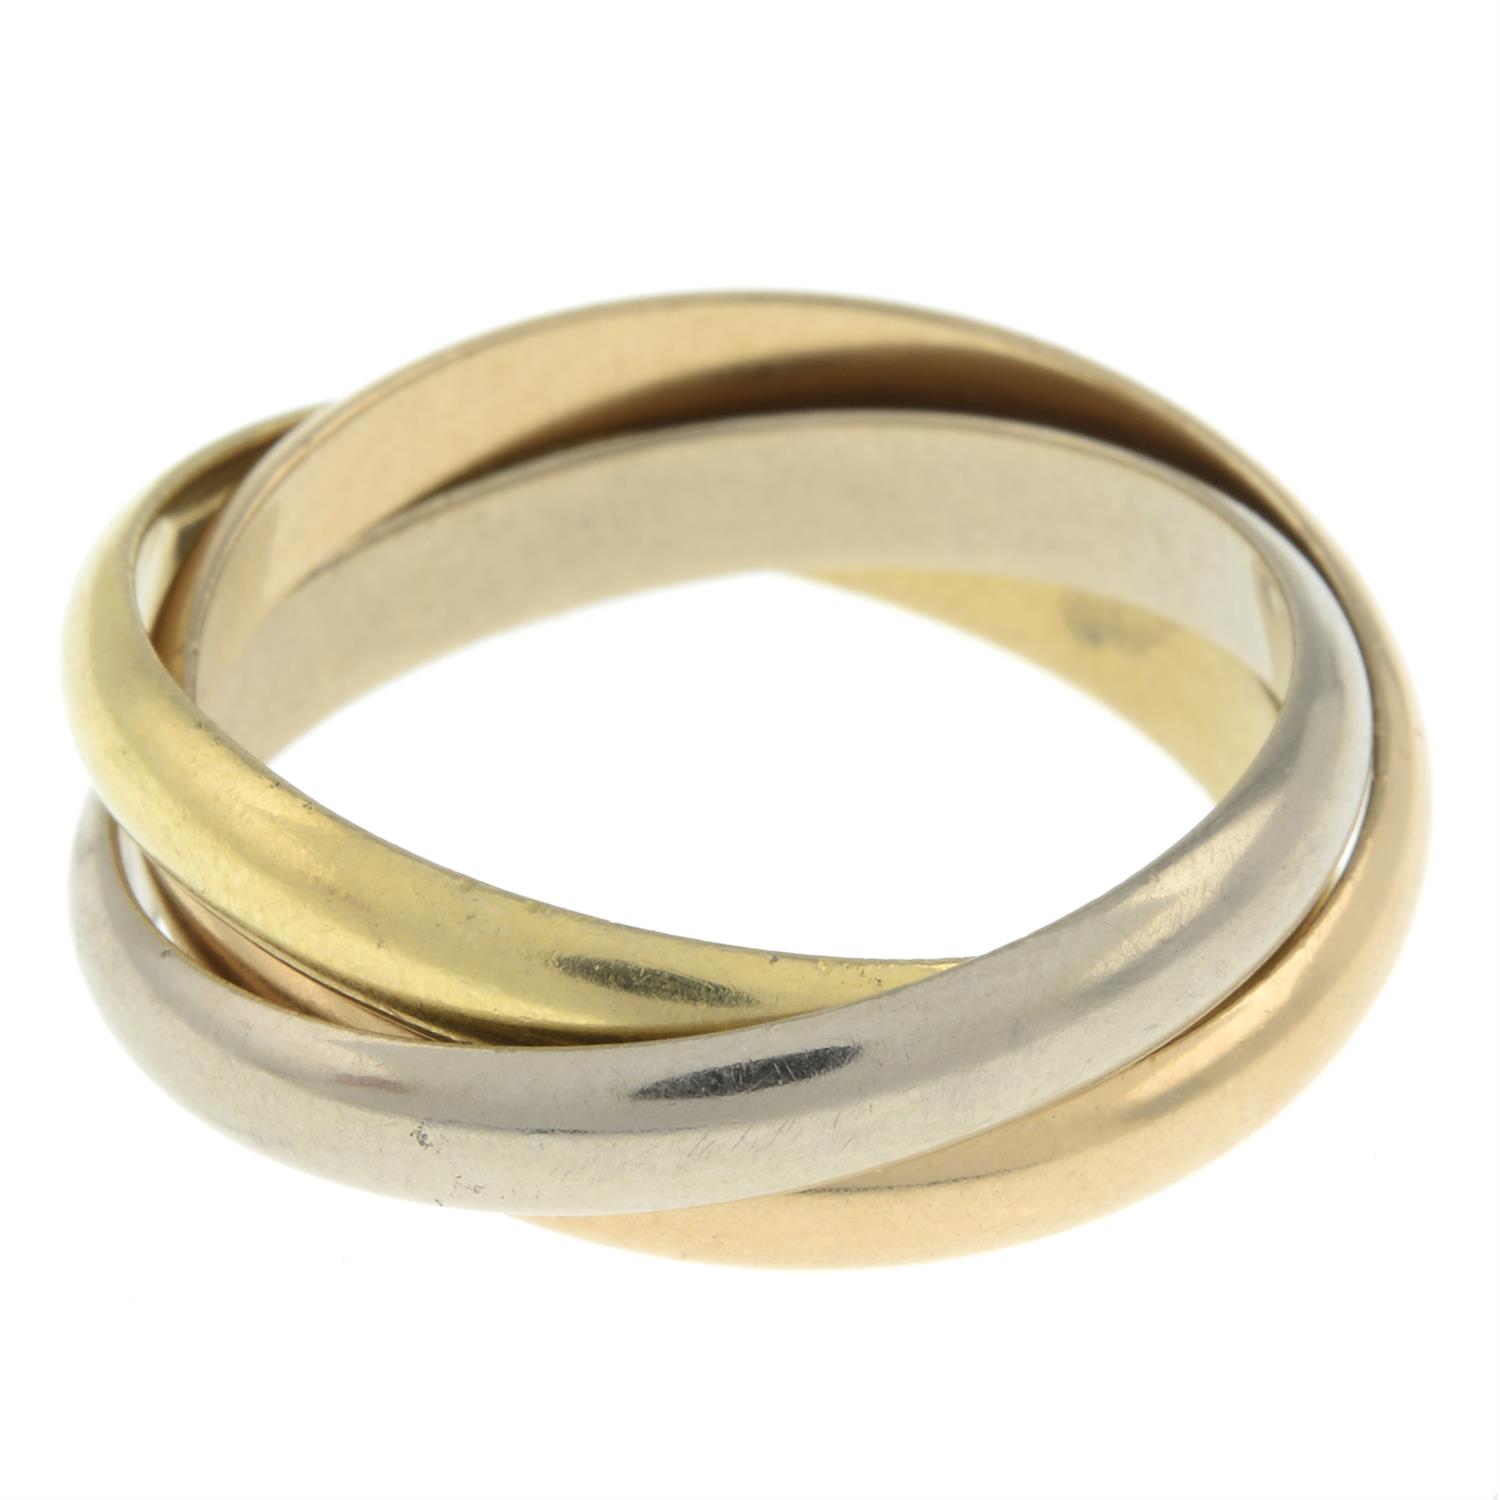 18ct gold 'Trinity' ring, by Cartier - Image 3 of 5